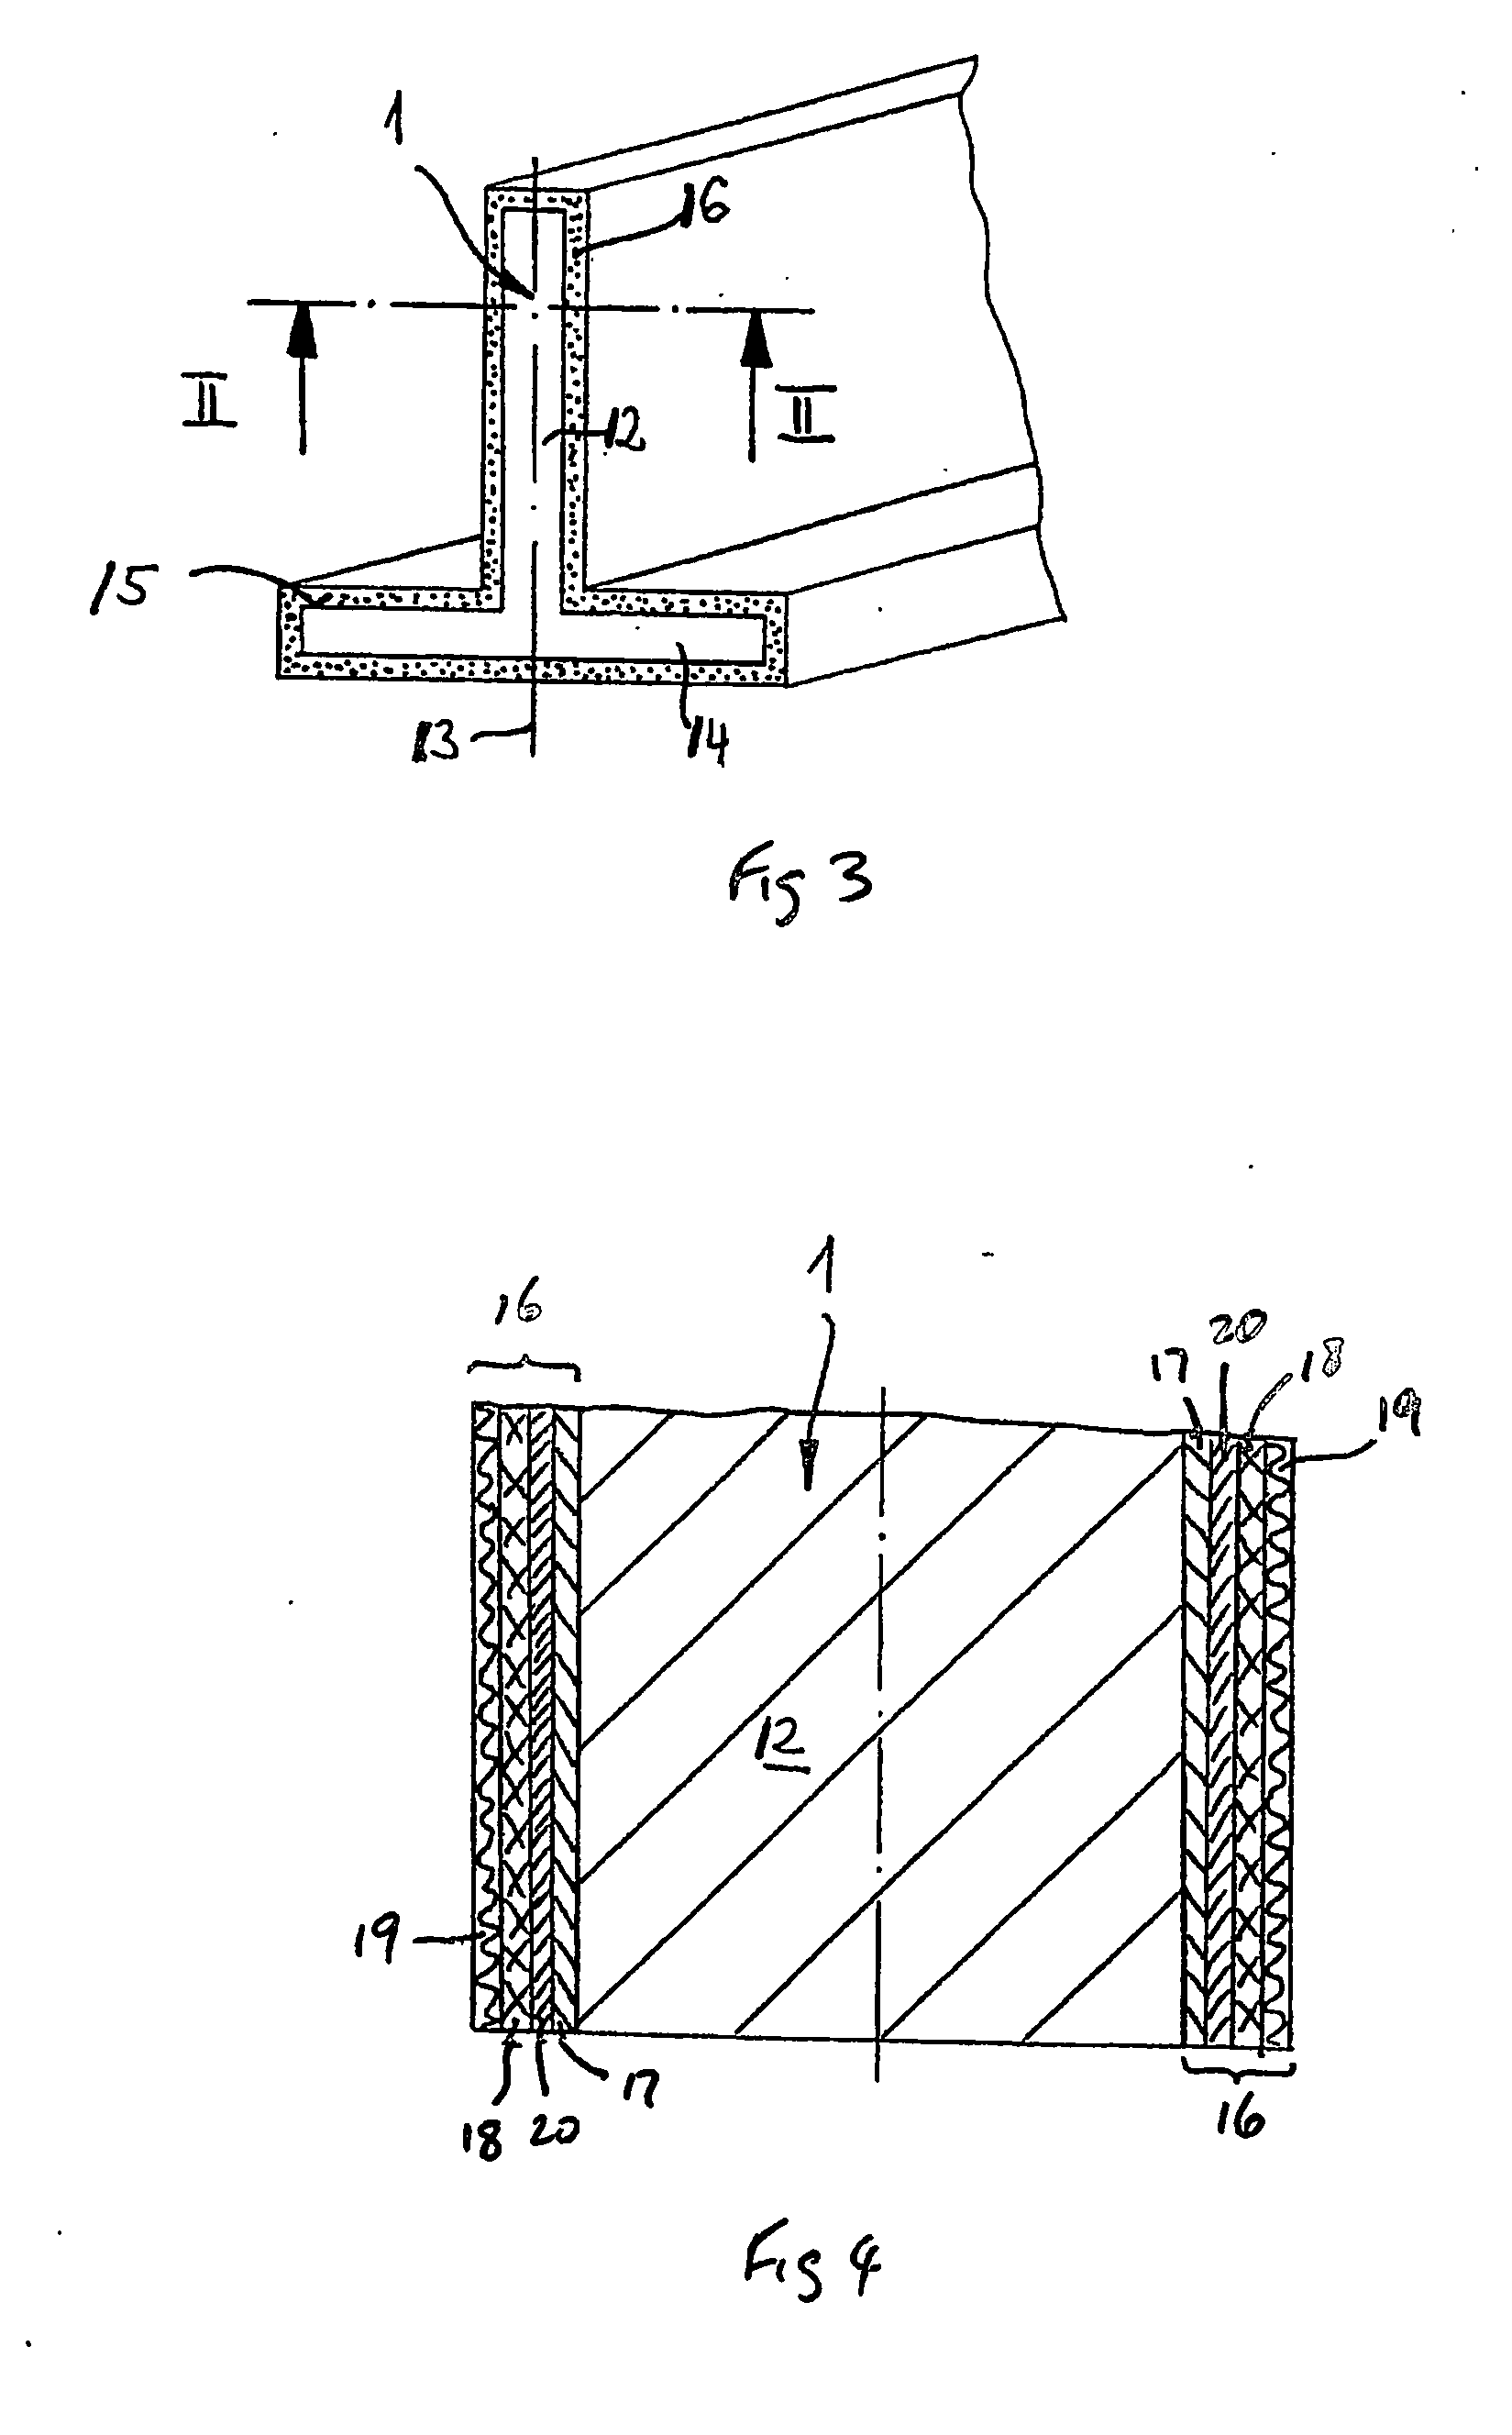 Cable and article design for fire performance